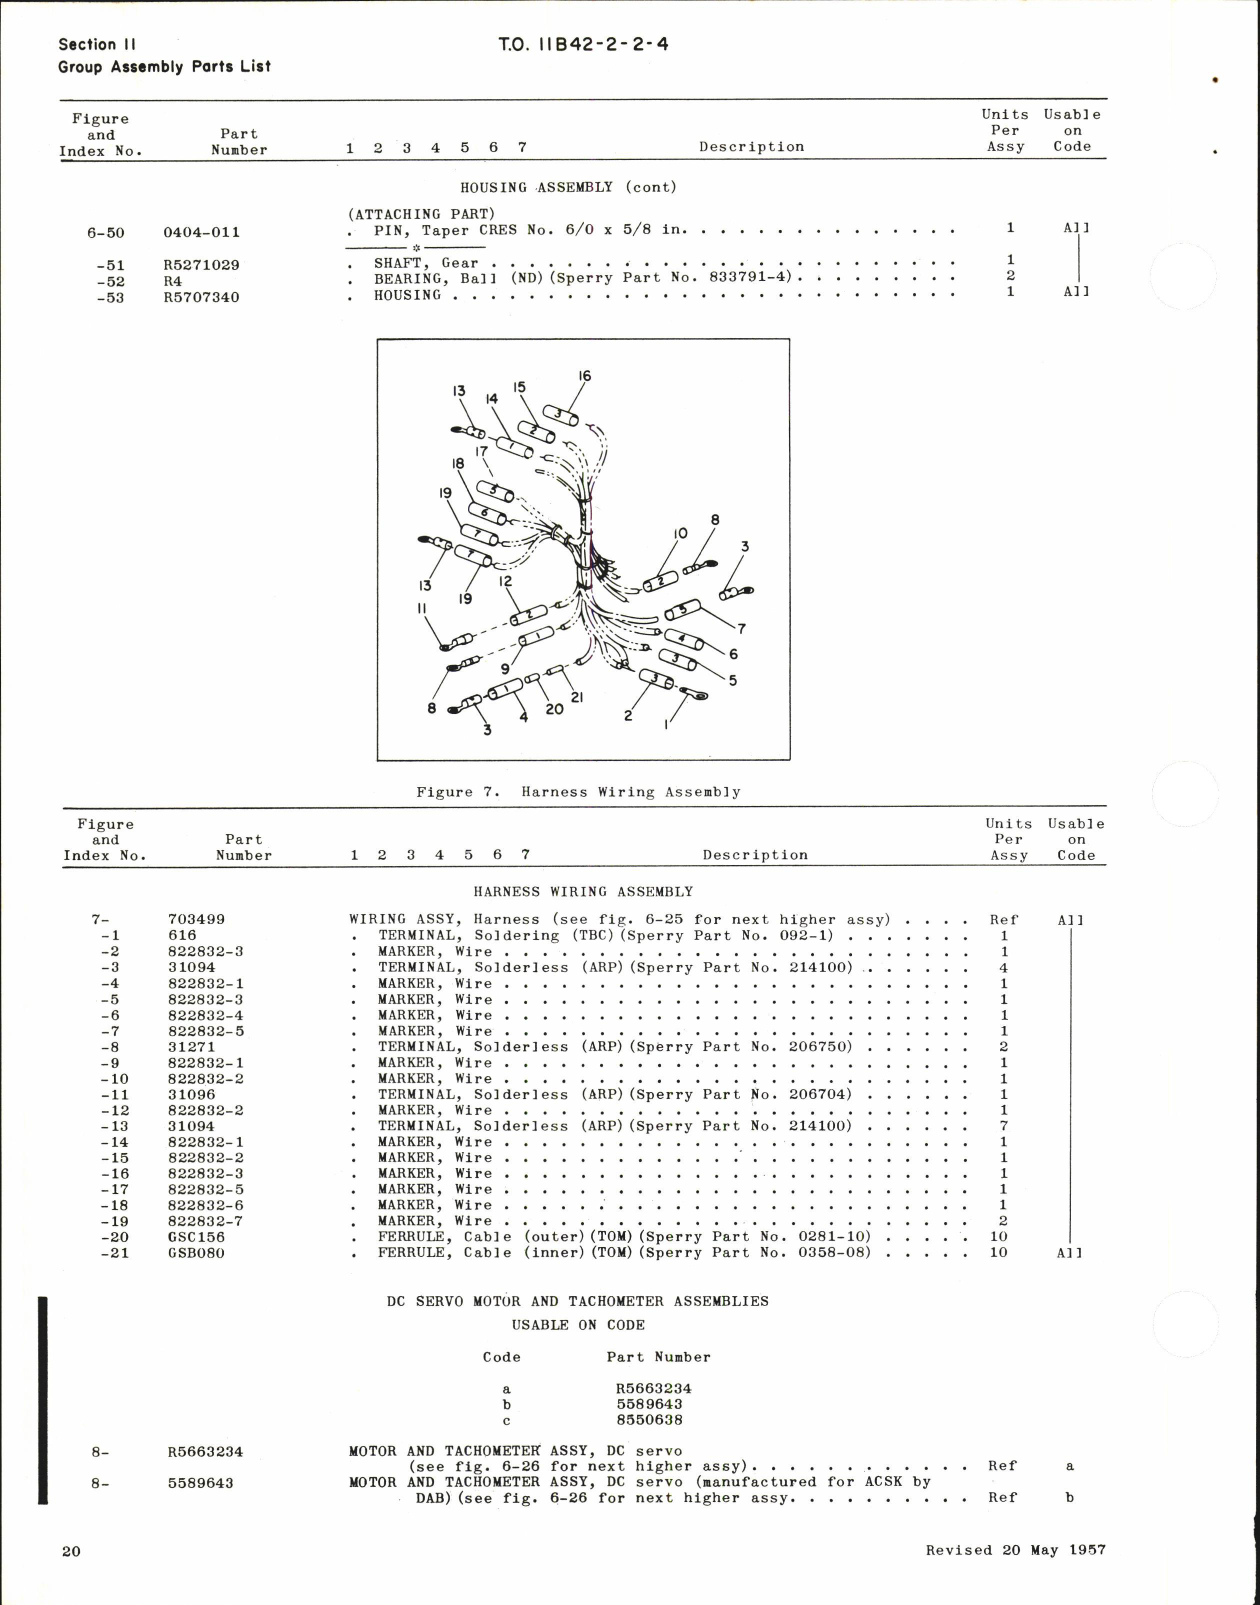 Sample page 8 from AirCorps Library document: Illustrated Parts Breakdown for Periscopic Bombsight Stabilizer Type B-1 Part No. 667126